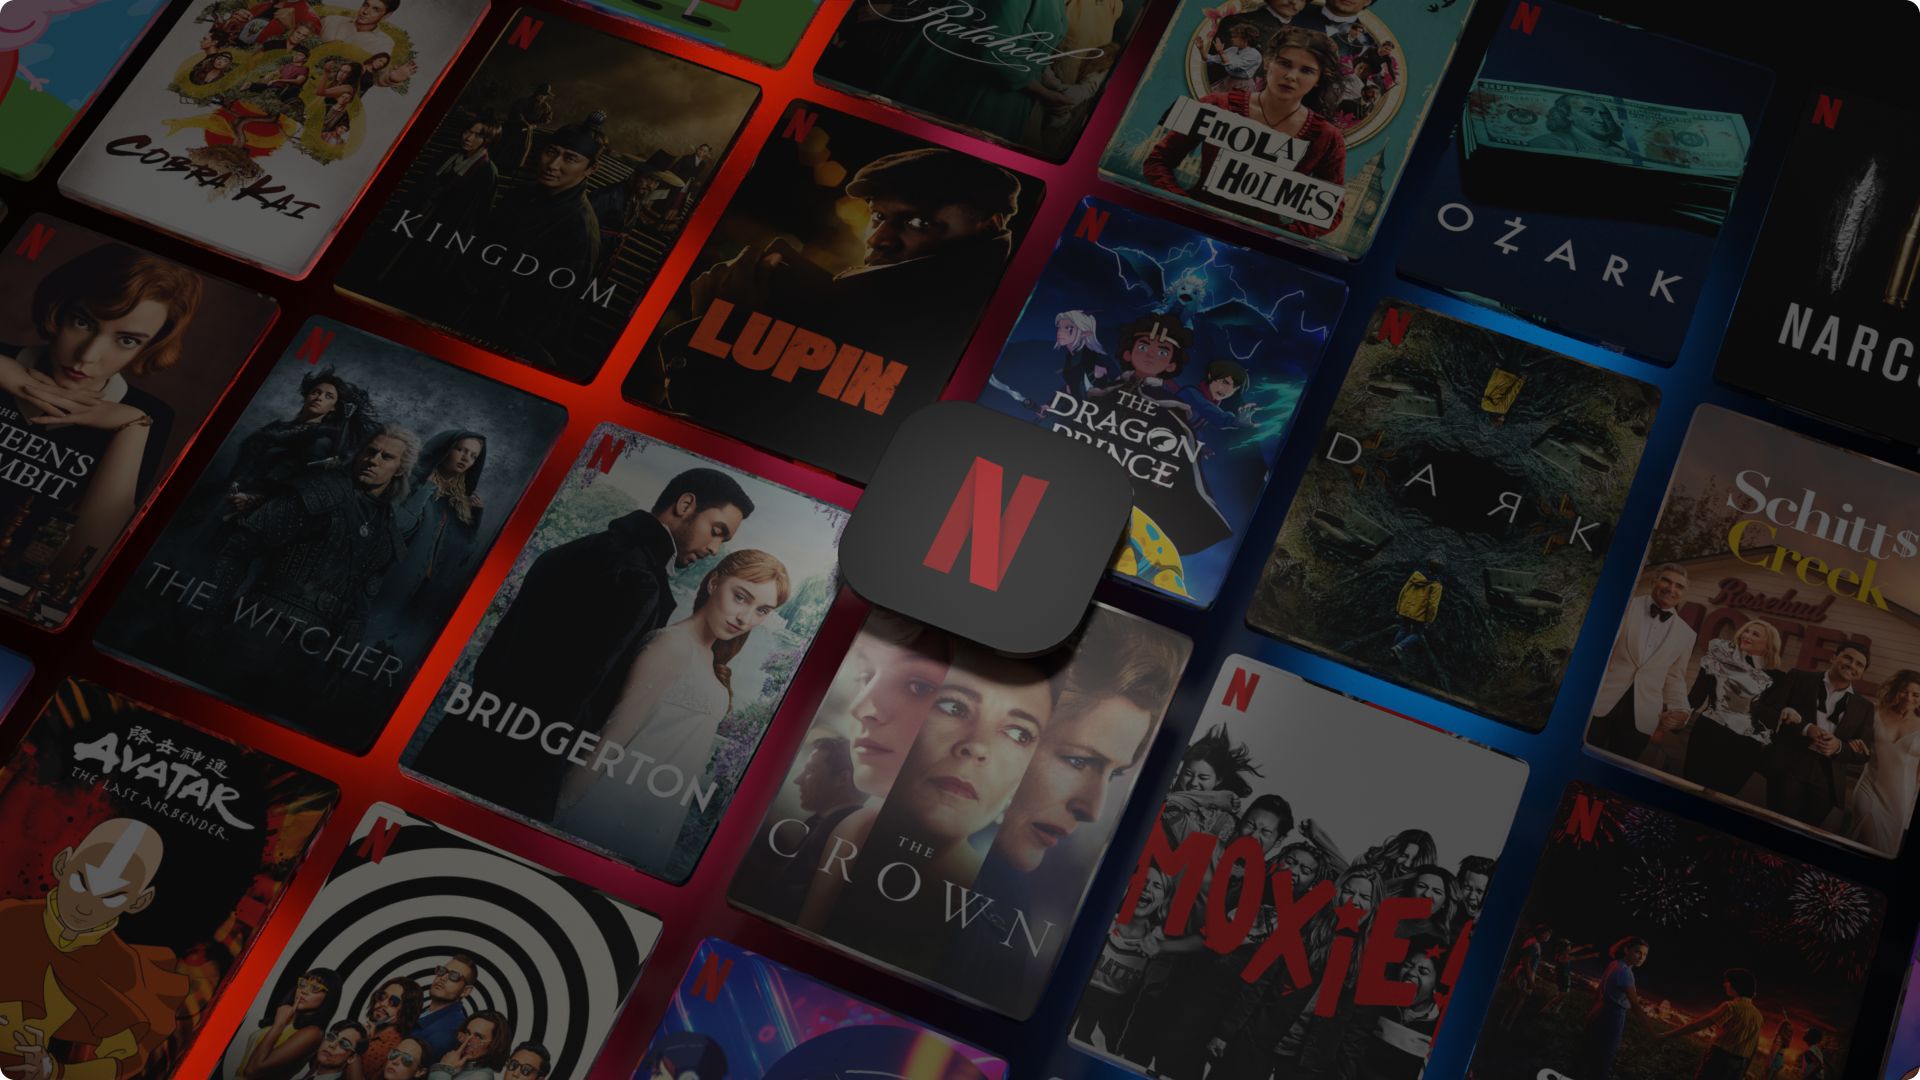 As many know, Netflix does not like that their users share accounts and early 2023 will be the end of Netflix password sharing era according to reports.